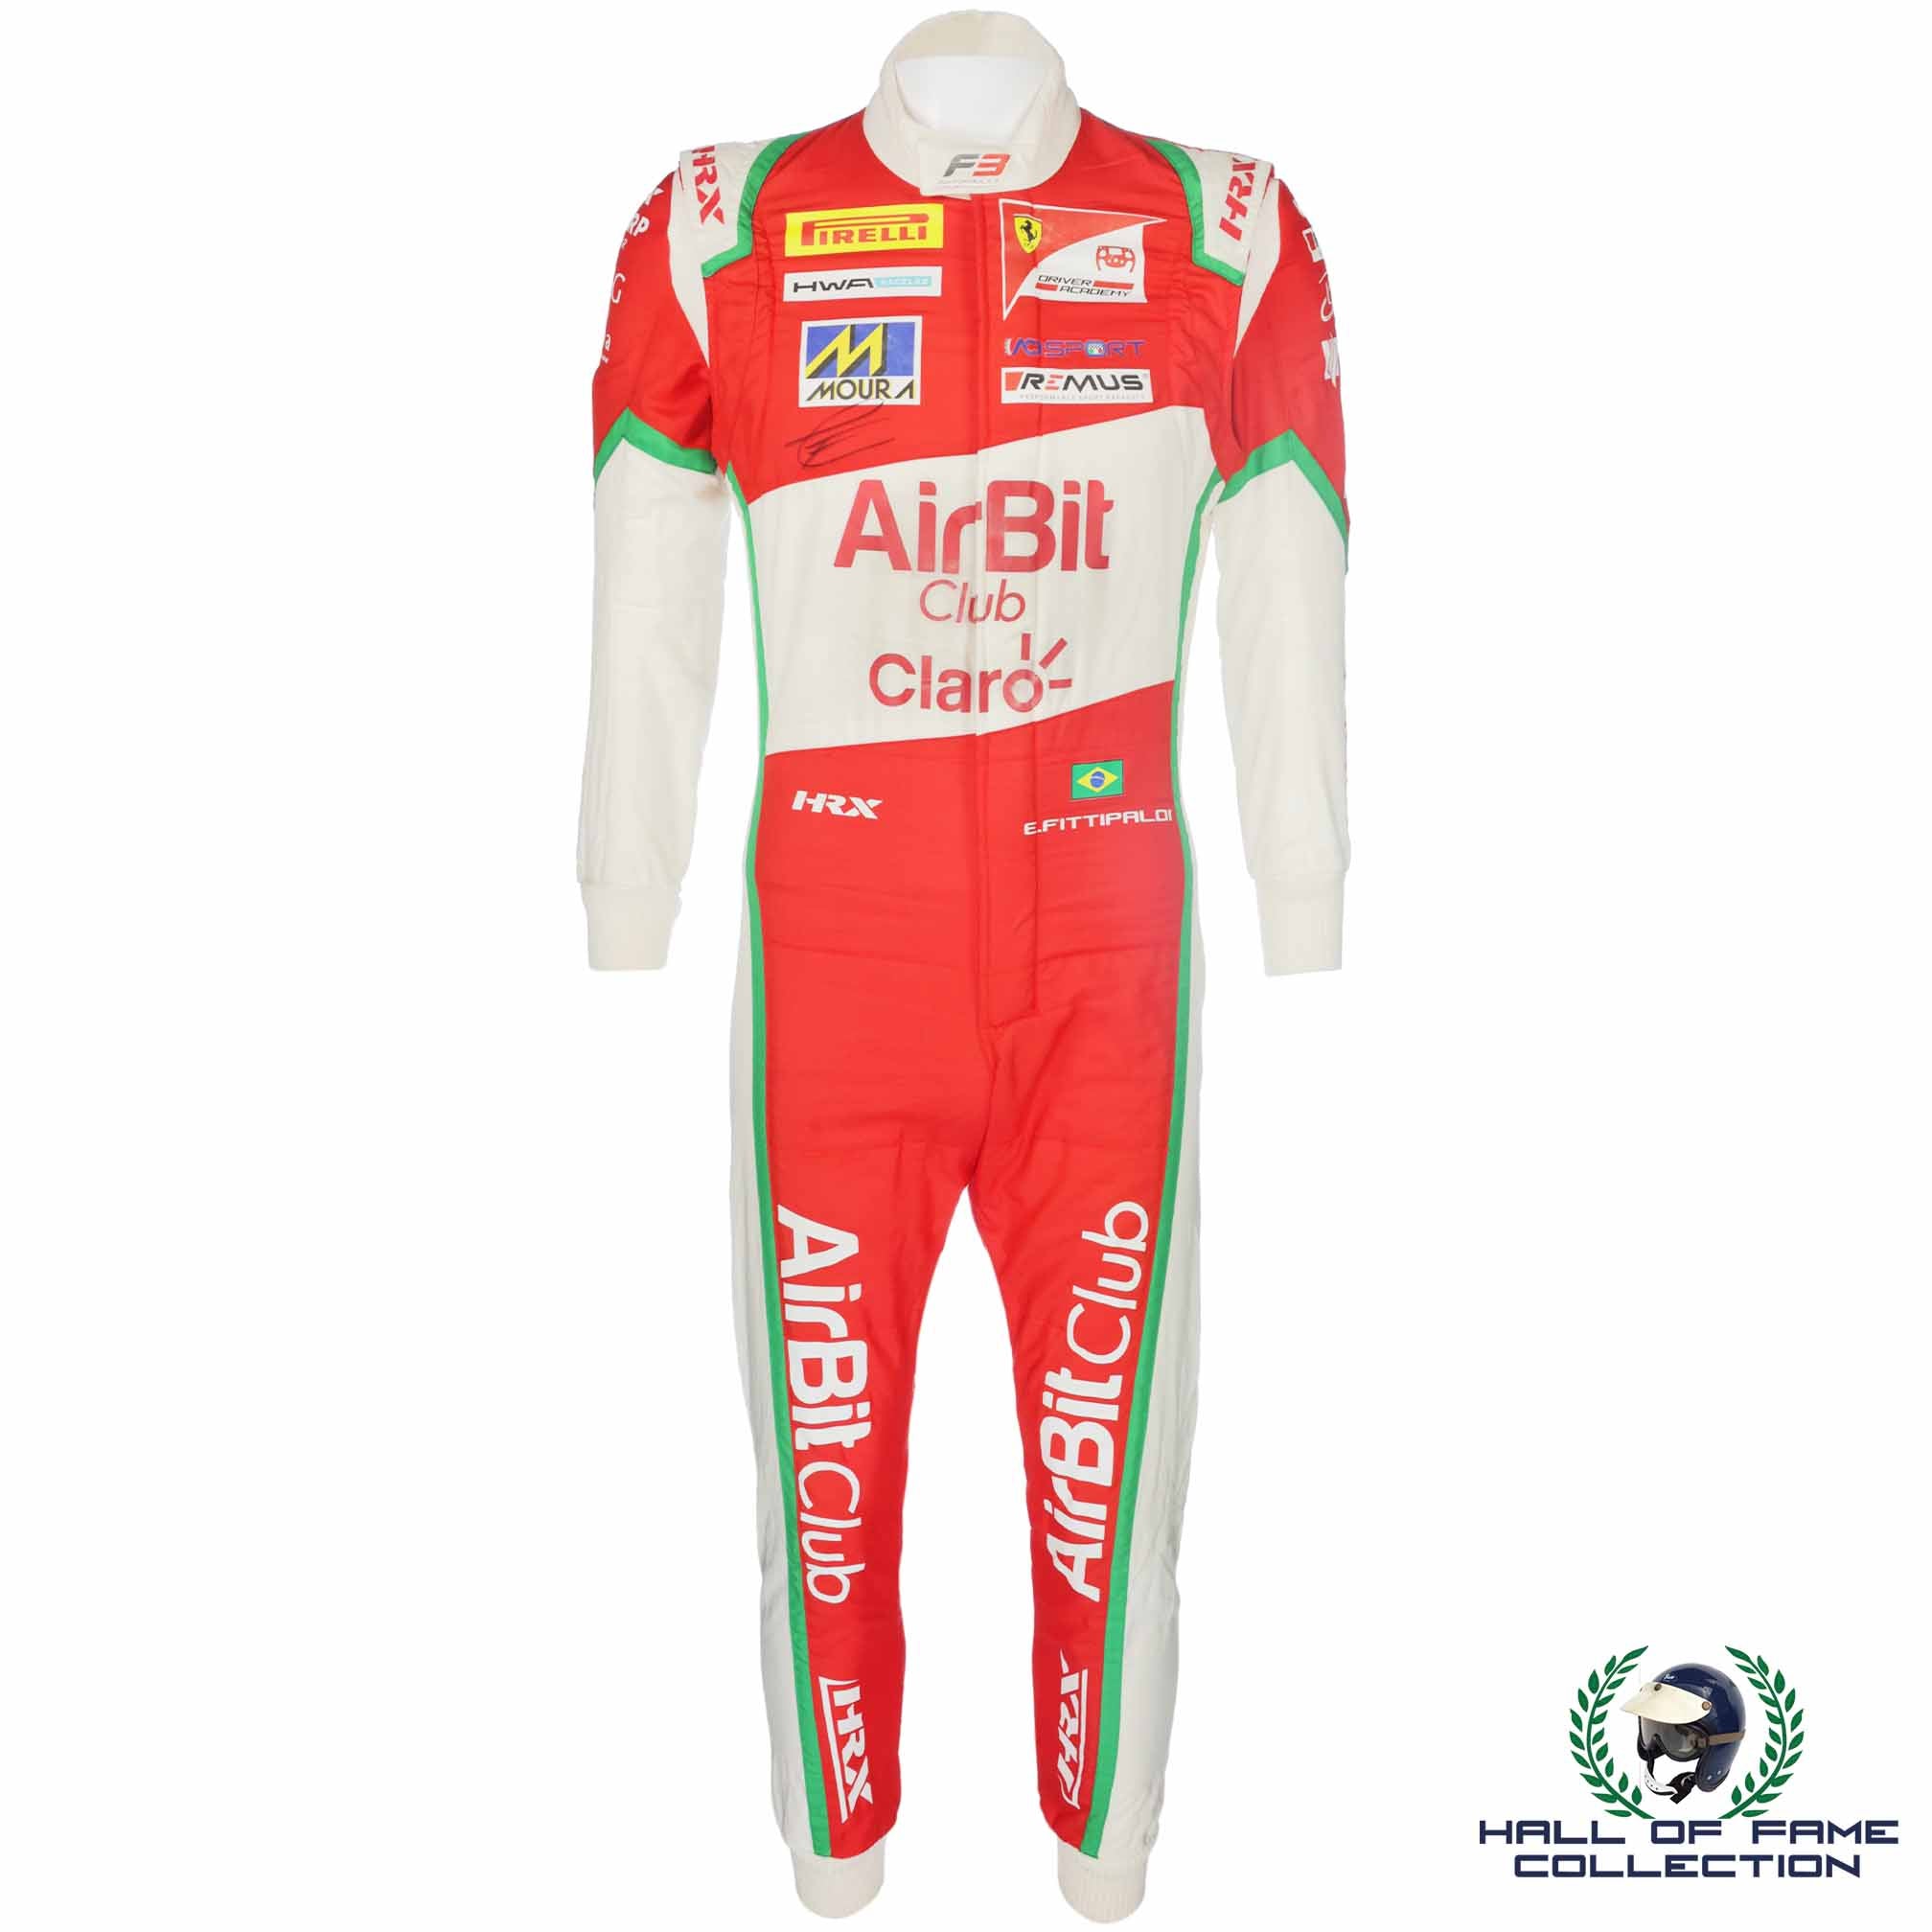 2020 Enzo Fittipaldi Signed Race Used HWA Racelab F3 Suit